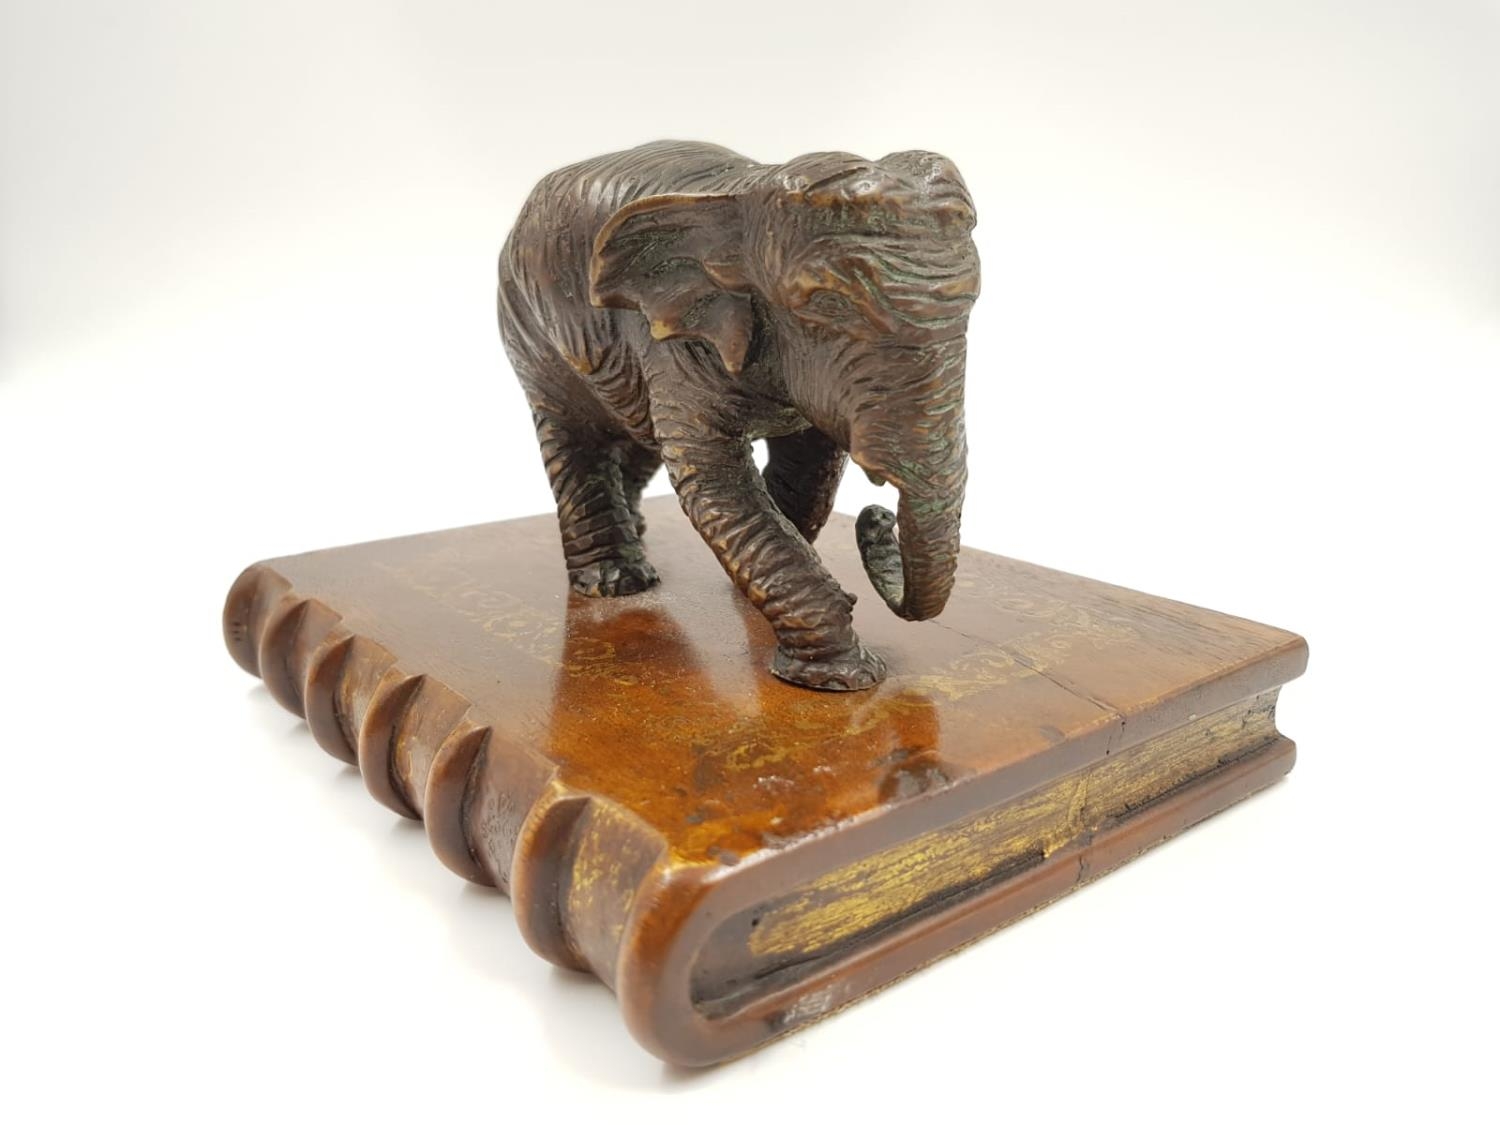 3 Vintage elephant figurines. 1 ceramic, made in France by Sevres, the other two are brass; one of - Image 4 of 11